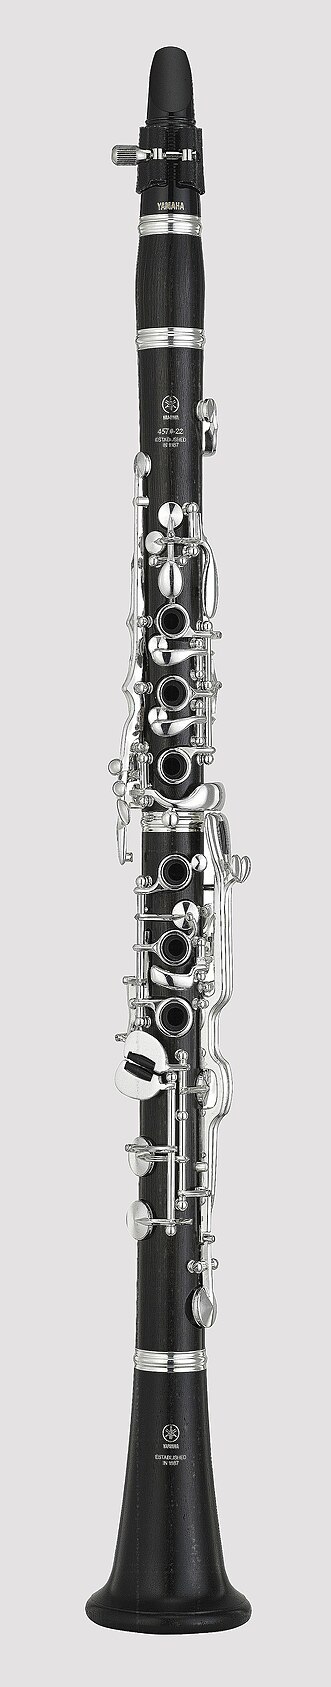 Standard German clarinet without cover or bell mechanism.